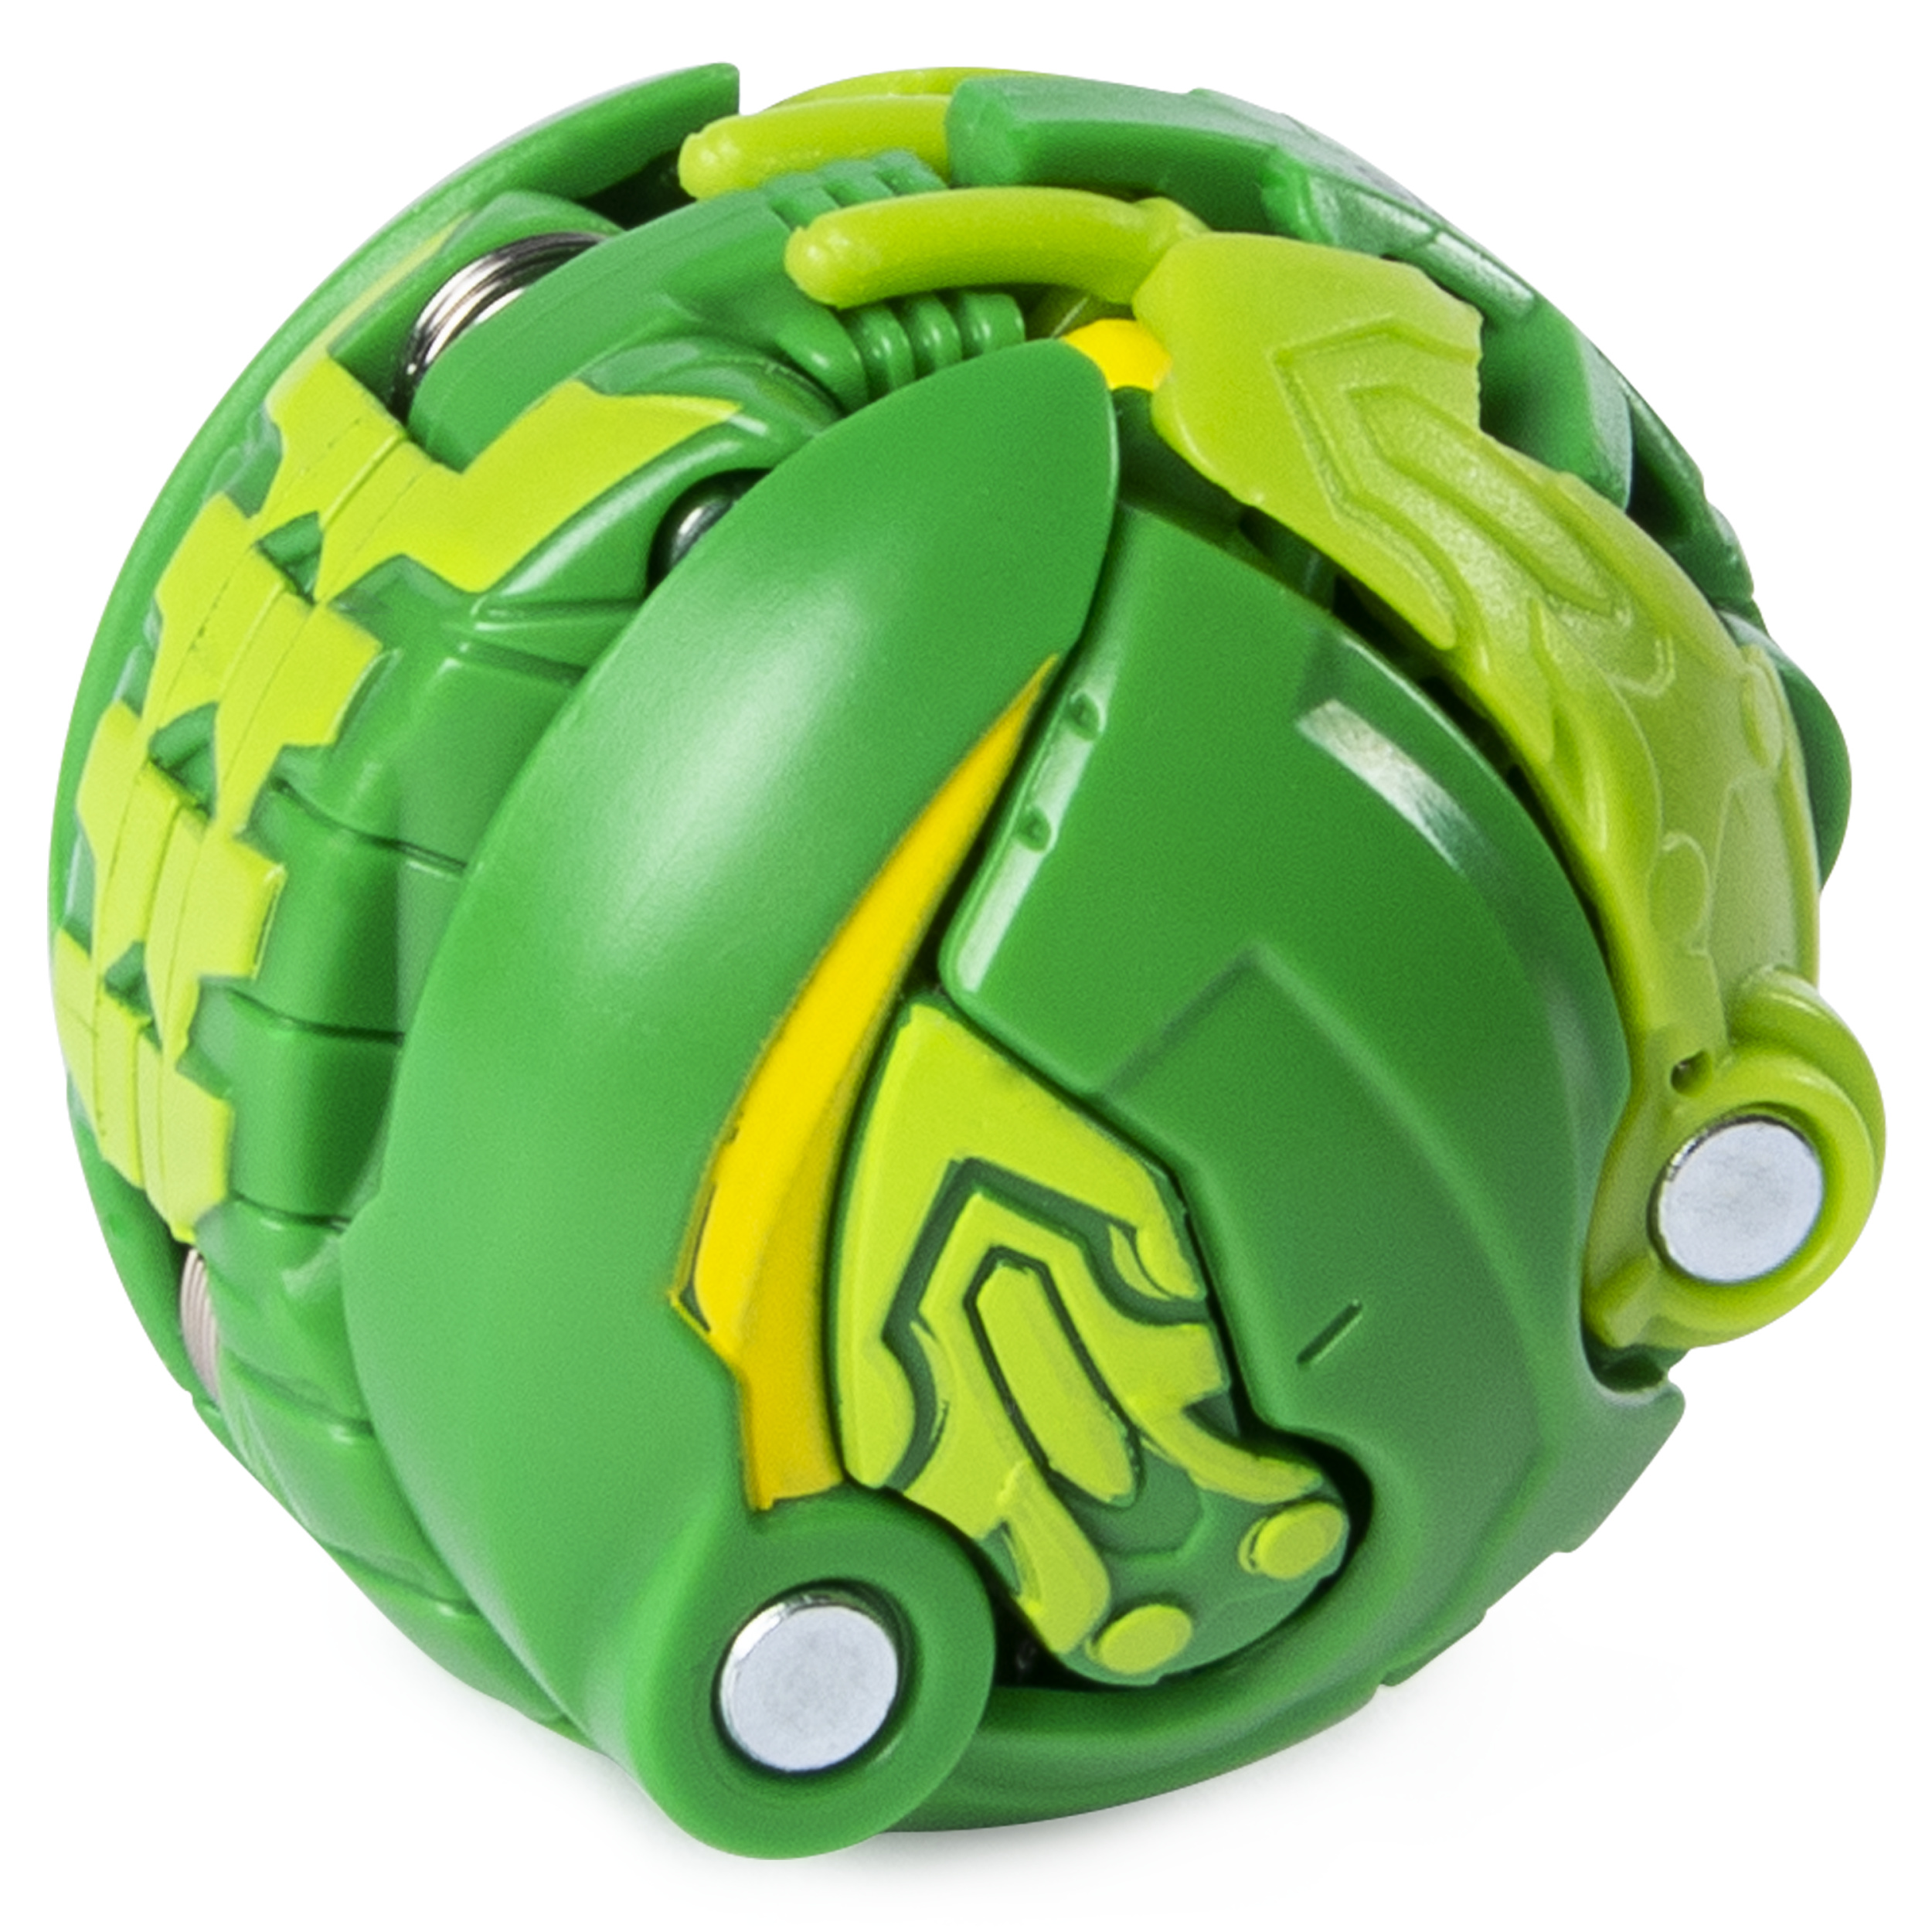 Bakugan Ultra, Mantonoid, 3-inch Collectible Action Figure and Trading Card, for Ages 6 and up - image 3 of 5